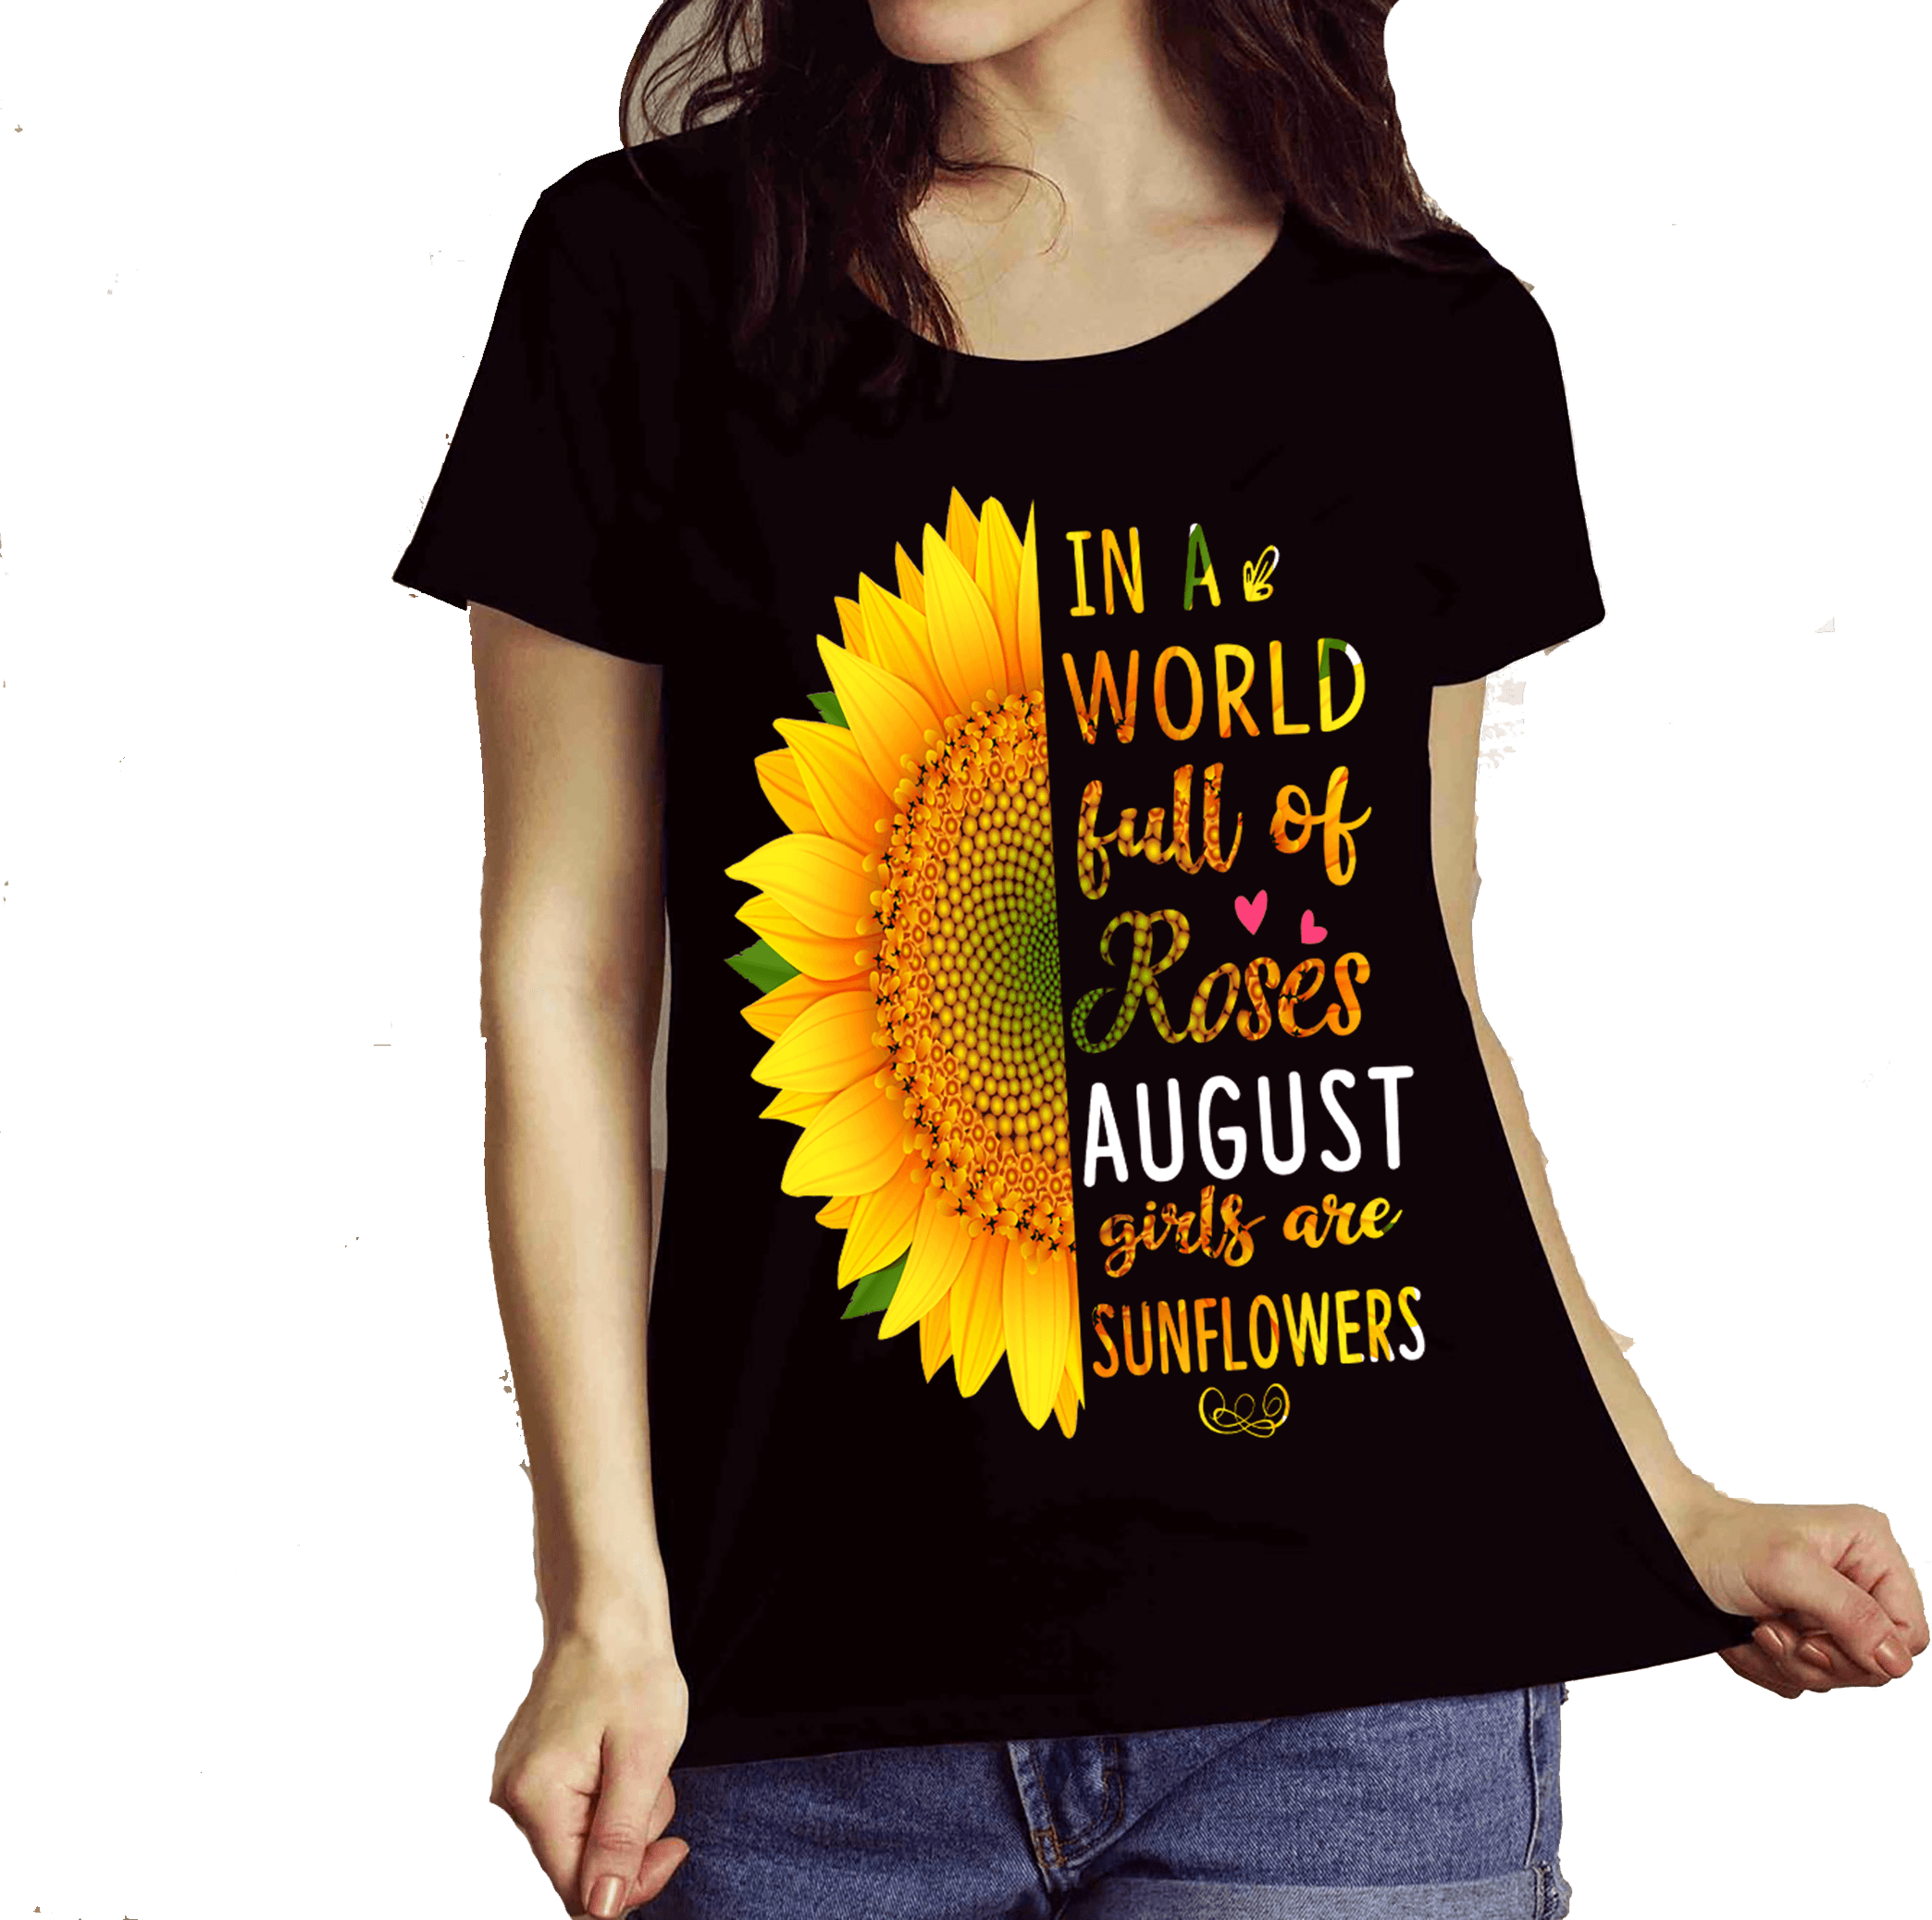 "August Combo (Sunflower And 3 Sides)" Pack of 2 Shirts